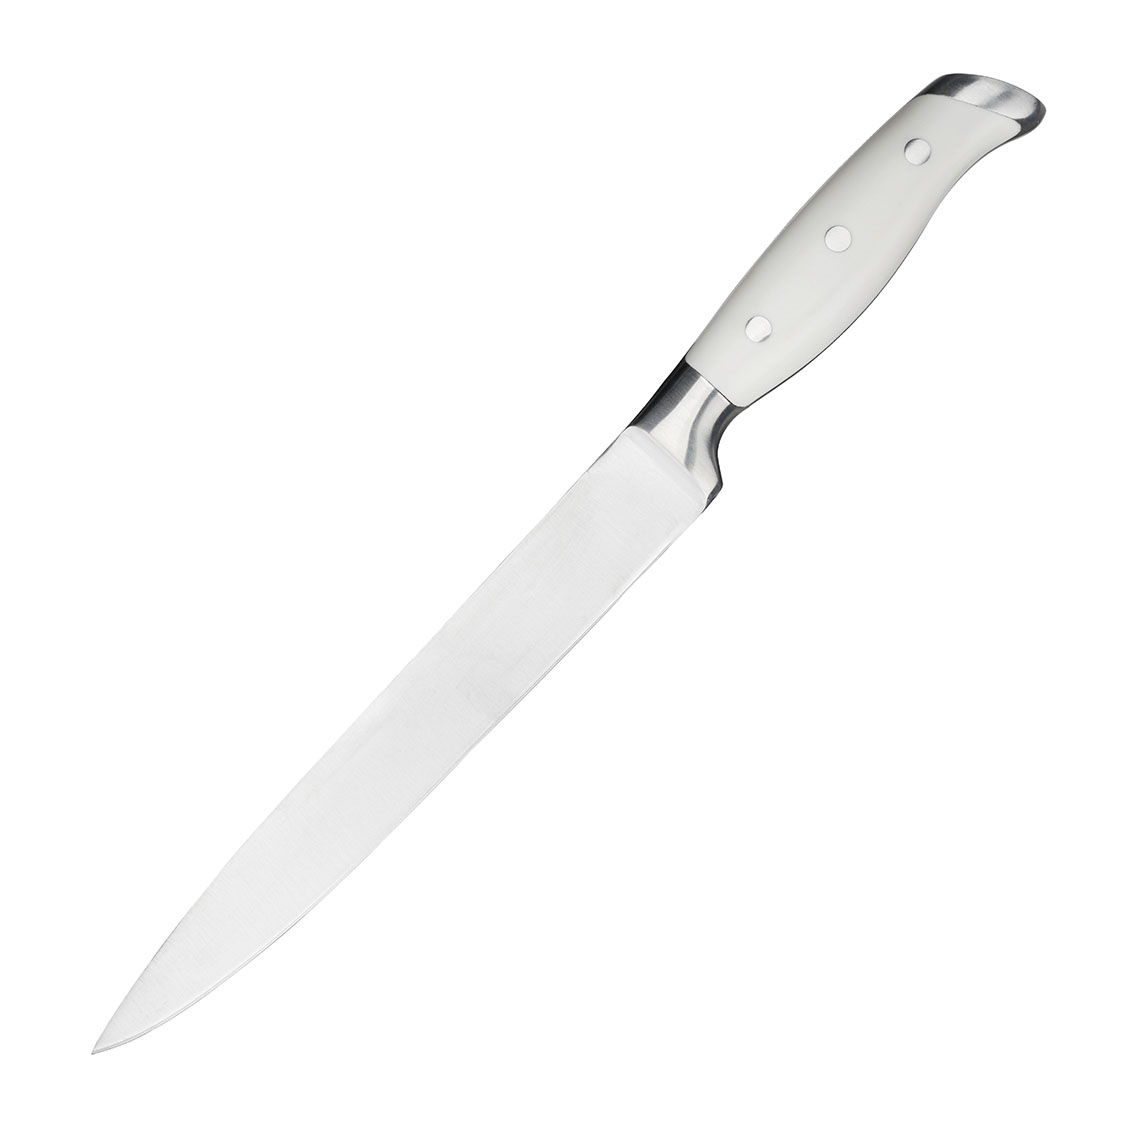 Jourmet 8-inch Slicing Knife displayed, highlighting its sleek stainless steel blade and ergonomic handle for efficient cutting tasks.